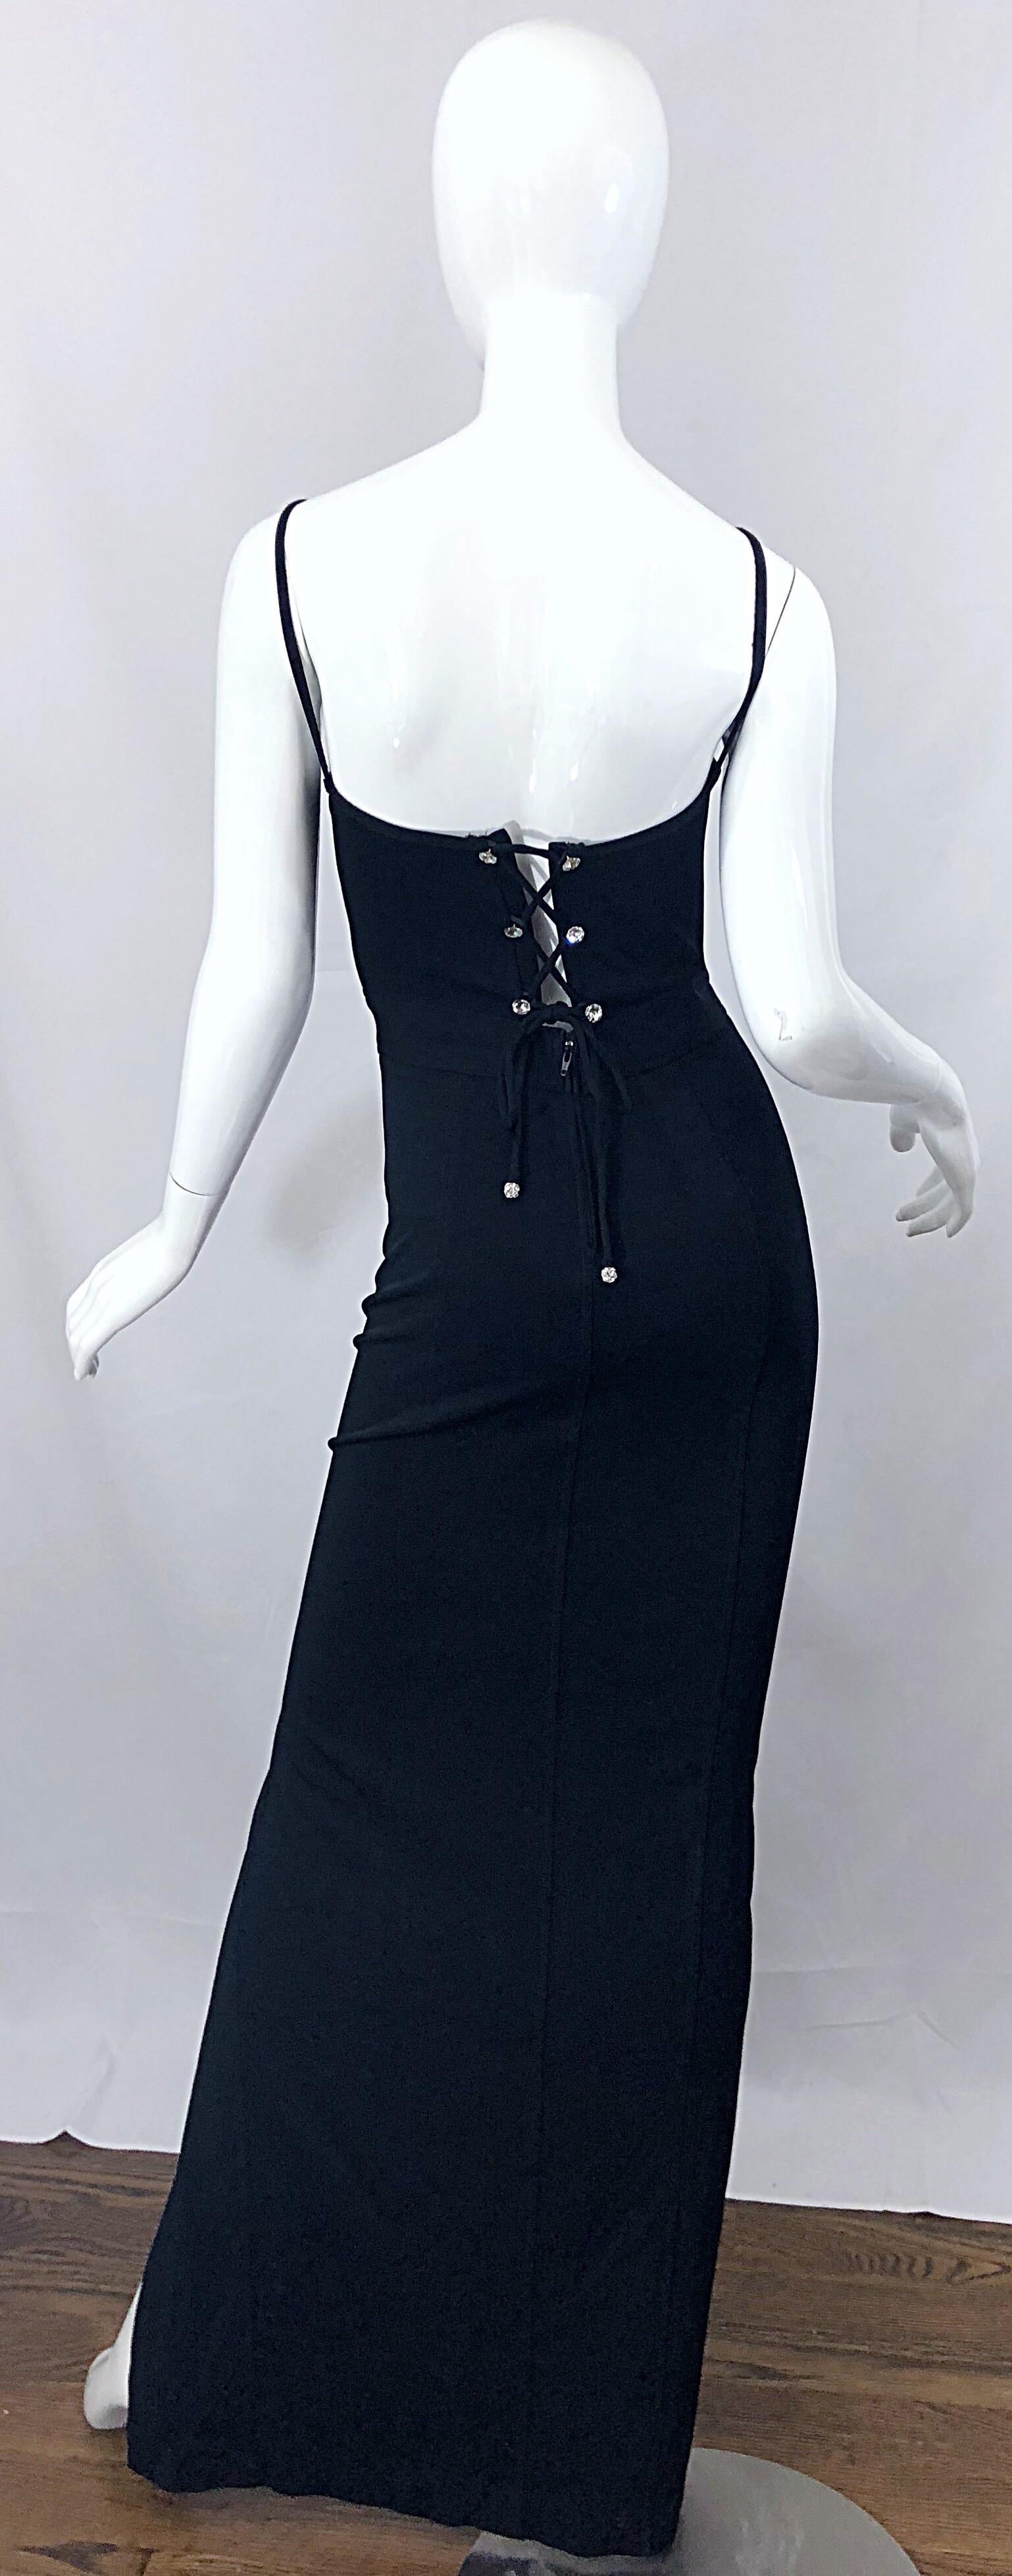 Sexy vintage 1990s TADASHI SHOJI black stretch criss-cross rhinestone back full length sleeveless evening dress! Features a soft stretch jersey that is both flattering and comfortable. Fitted beaded and rhinestone bodice. Criss-cross rhinestone